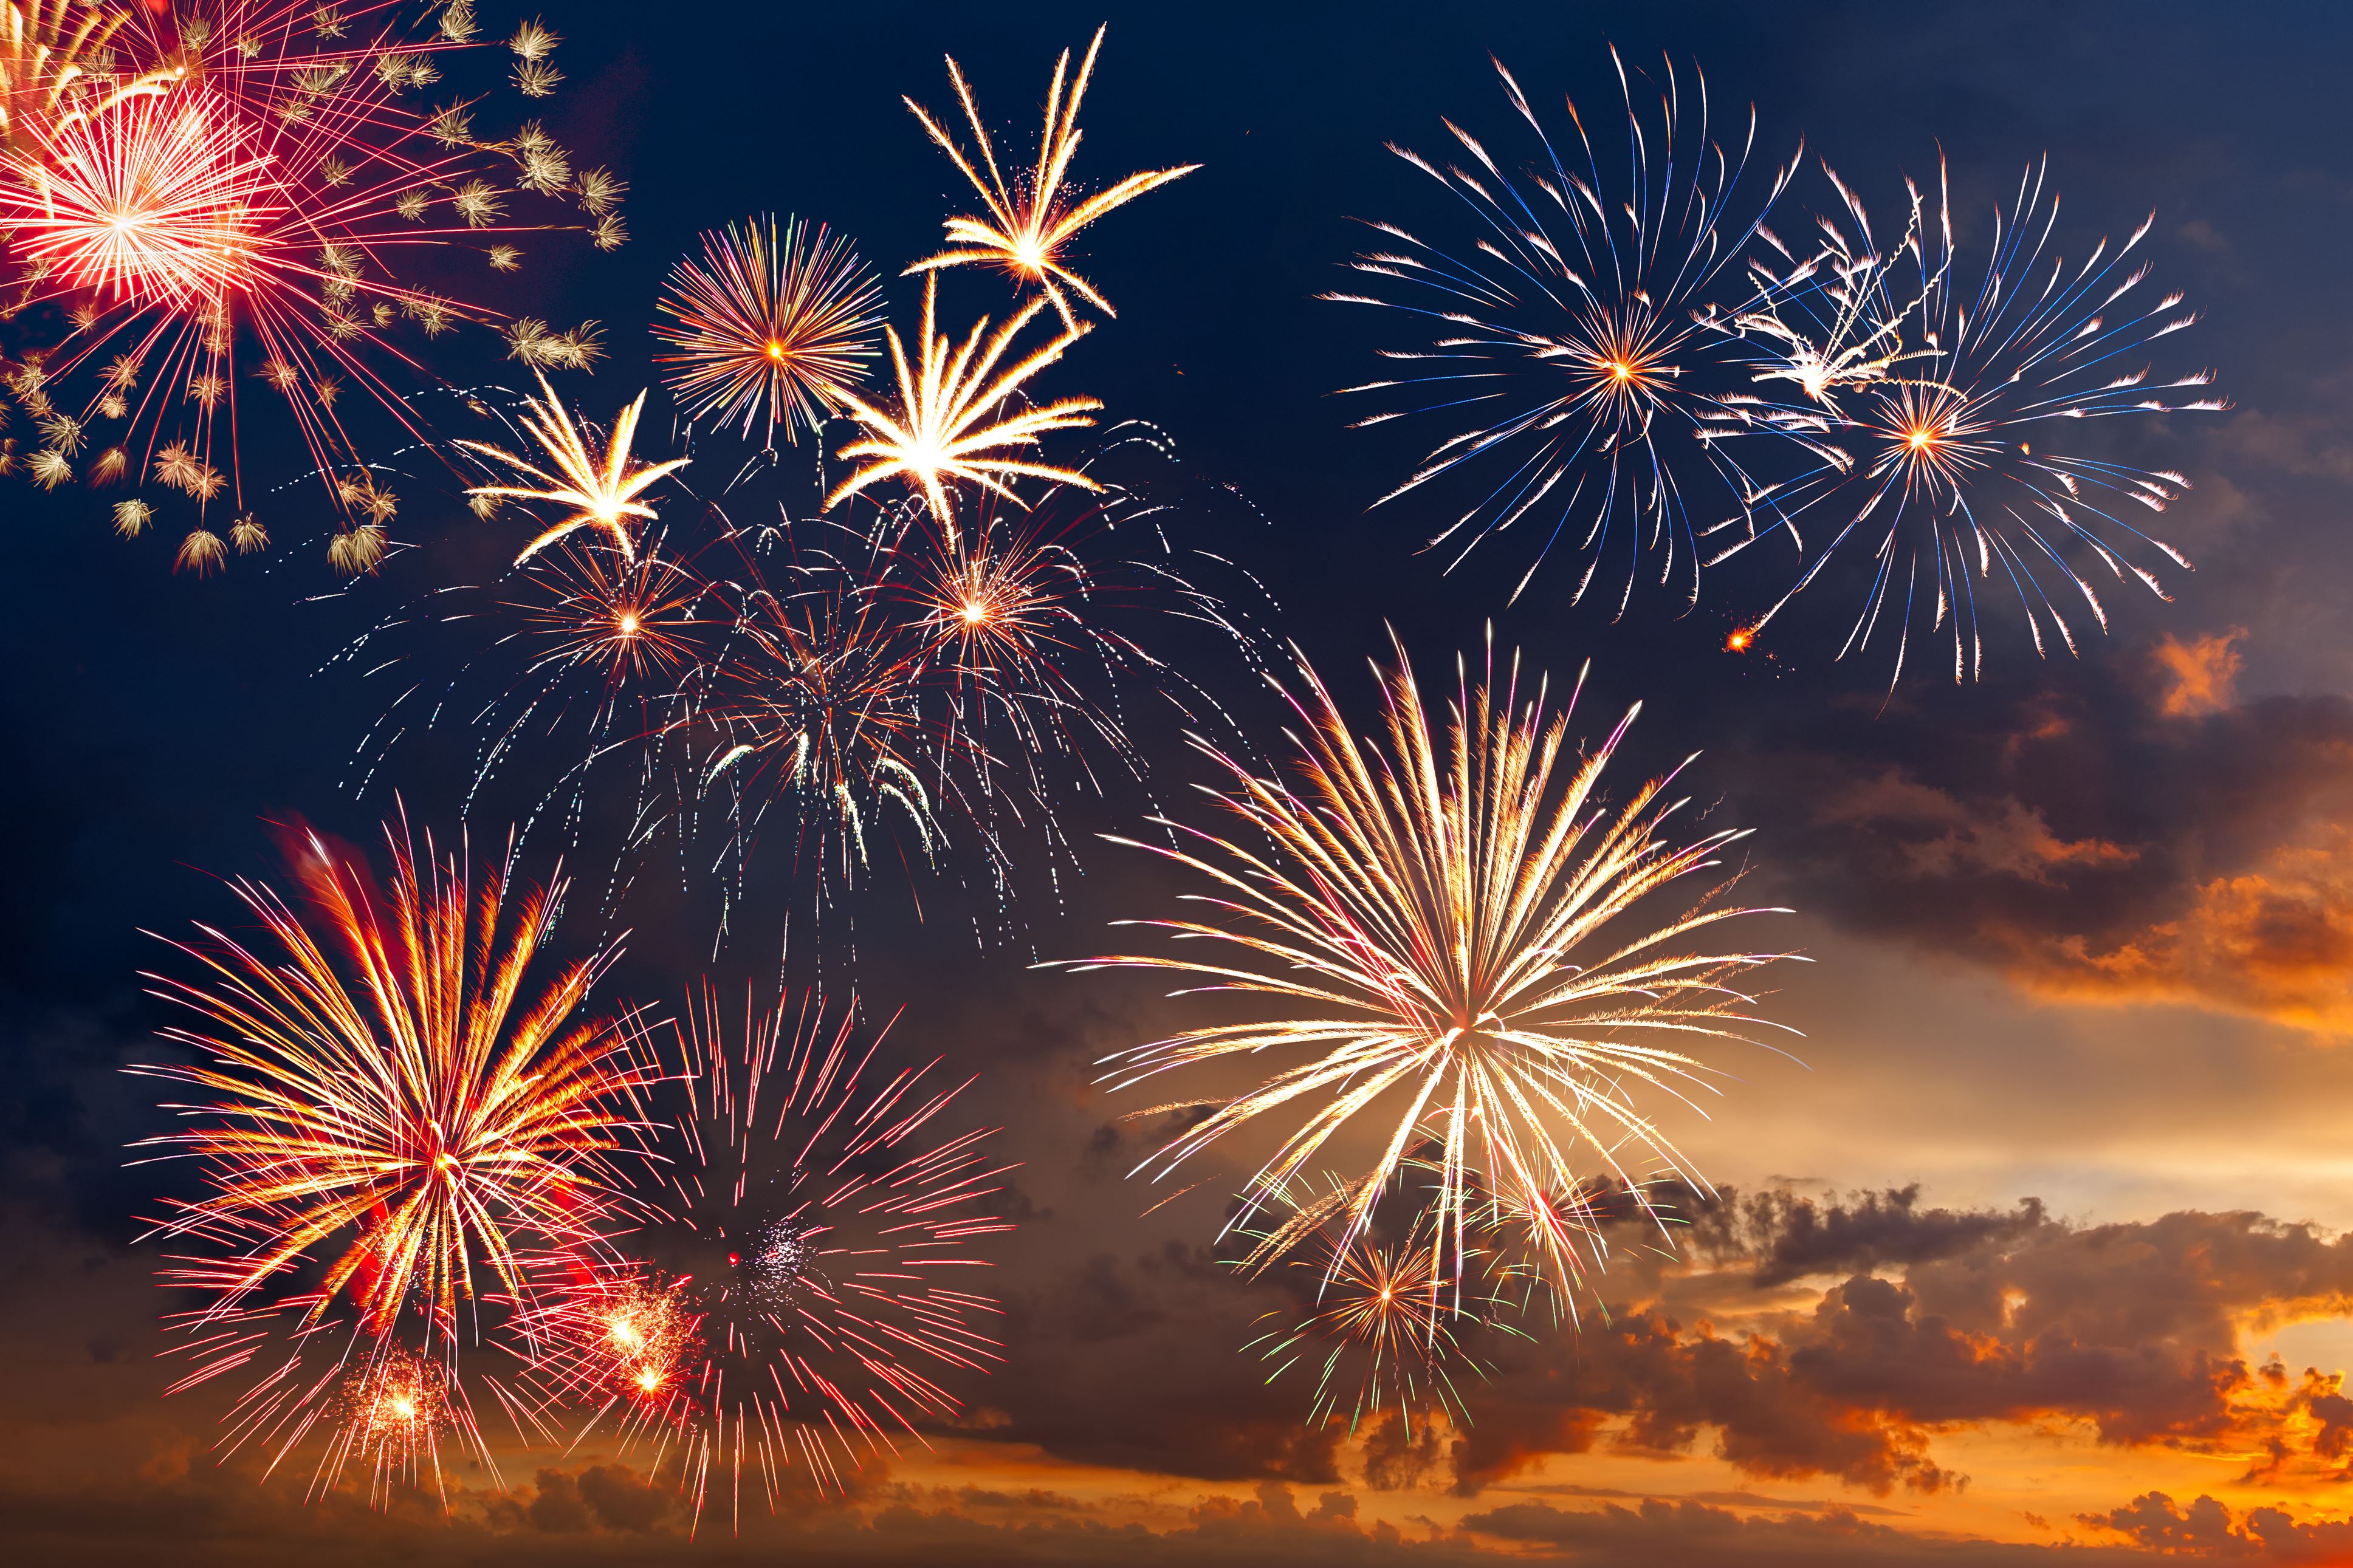 Are Fireworks Illegal in California? Law Offices of Evan E. Zelig, P.C.